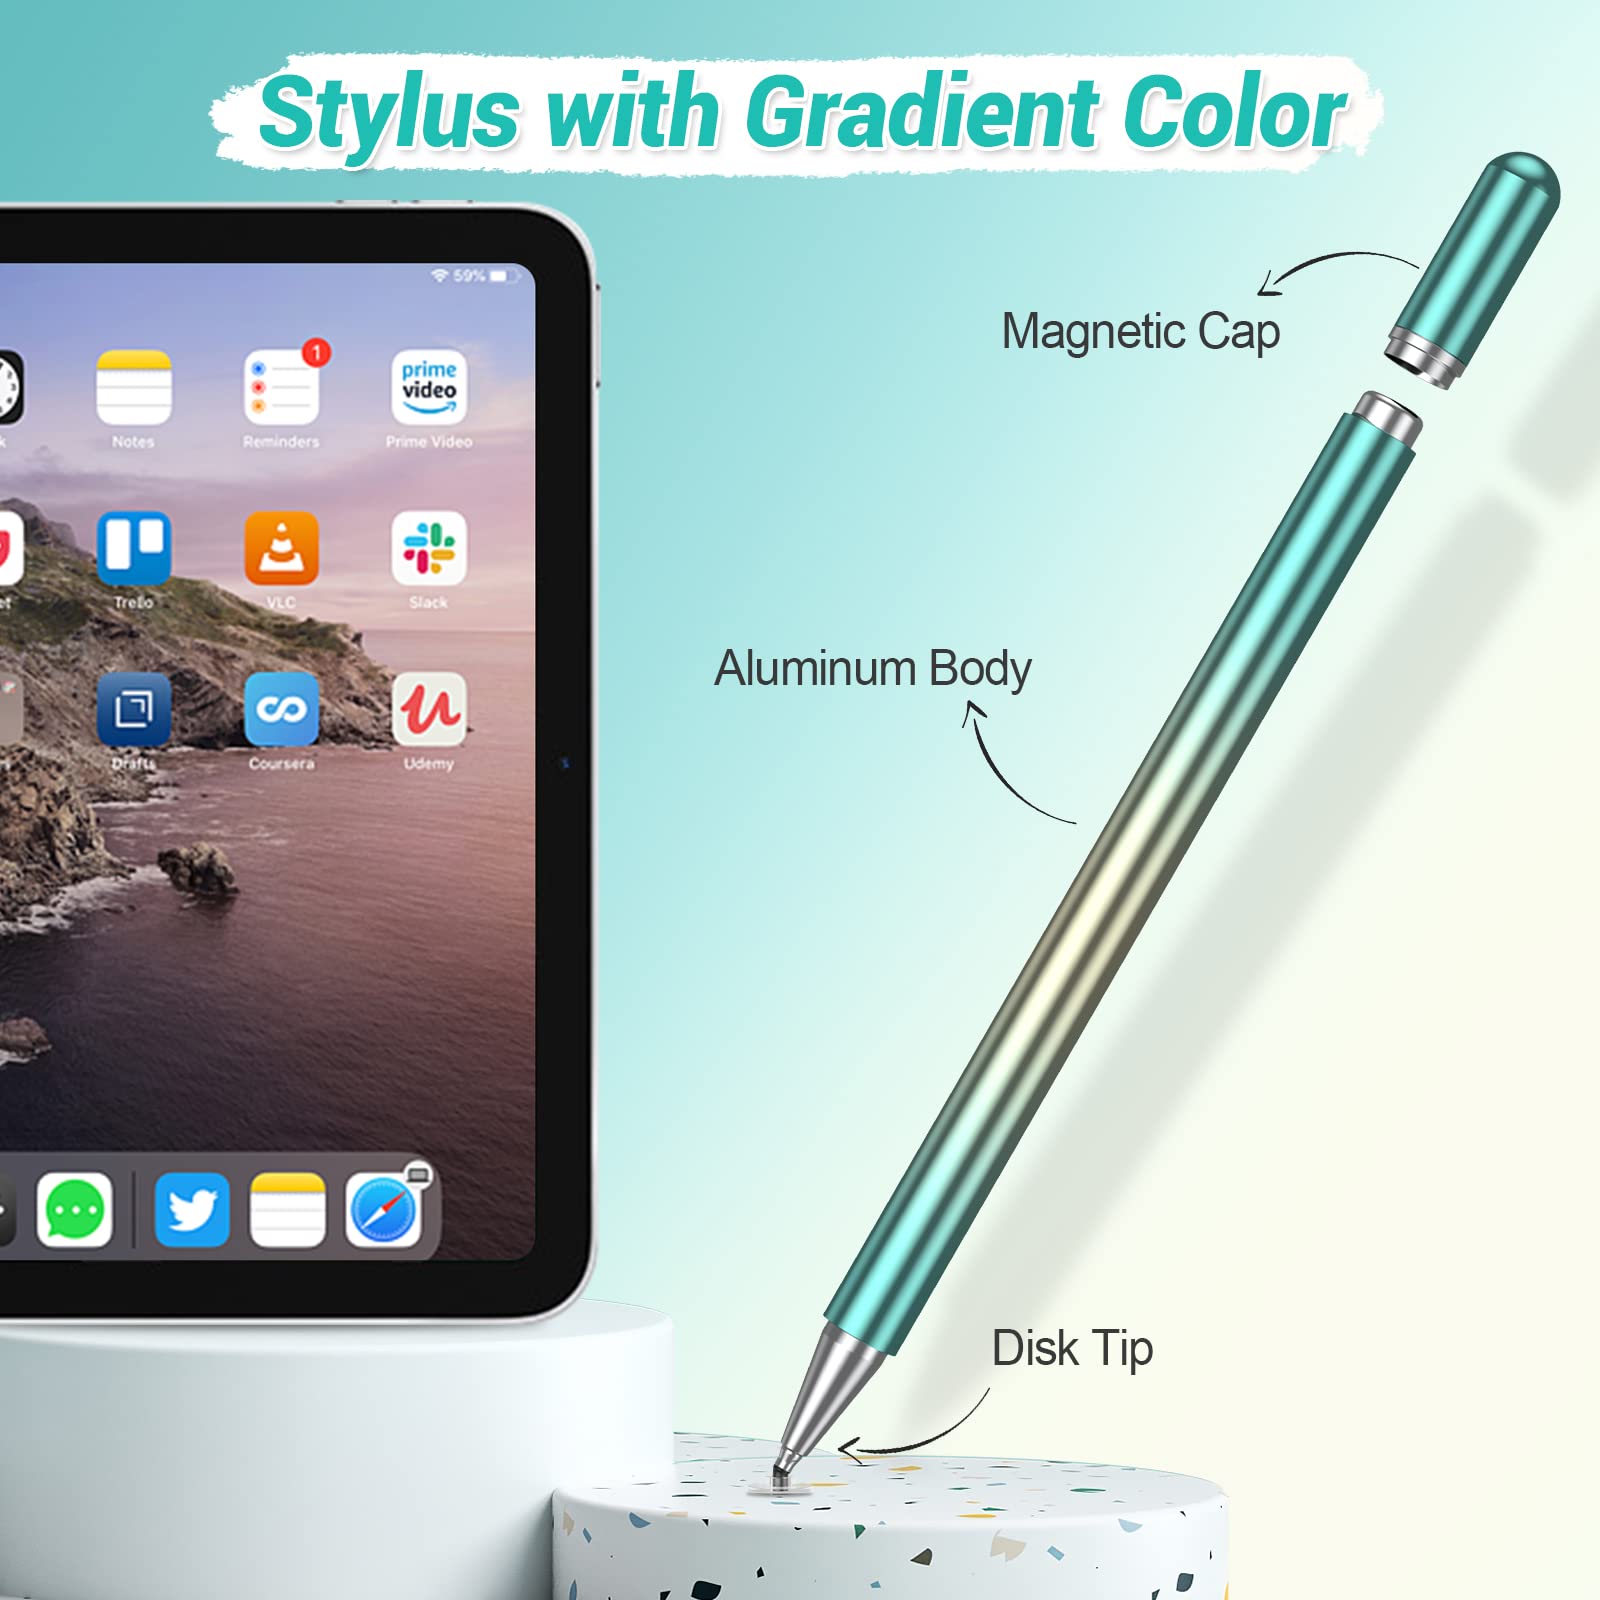 Stylus Pens for Touch Screens, High Precision Disk Stylus Pen for iPad with 2 Replaceable Tips Compatible with iPad/iPhone/Android/Tablet and All Universal Touch Screen Devices